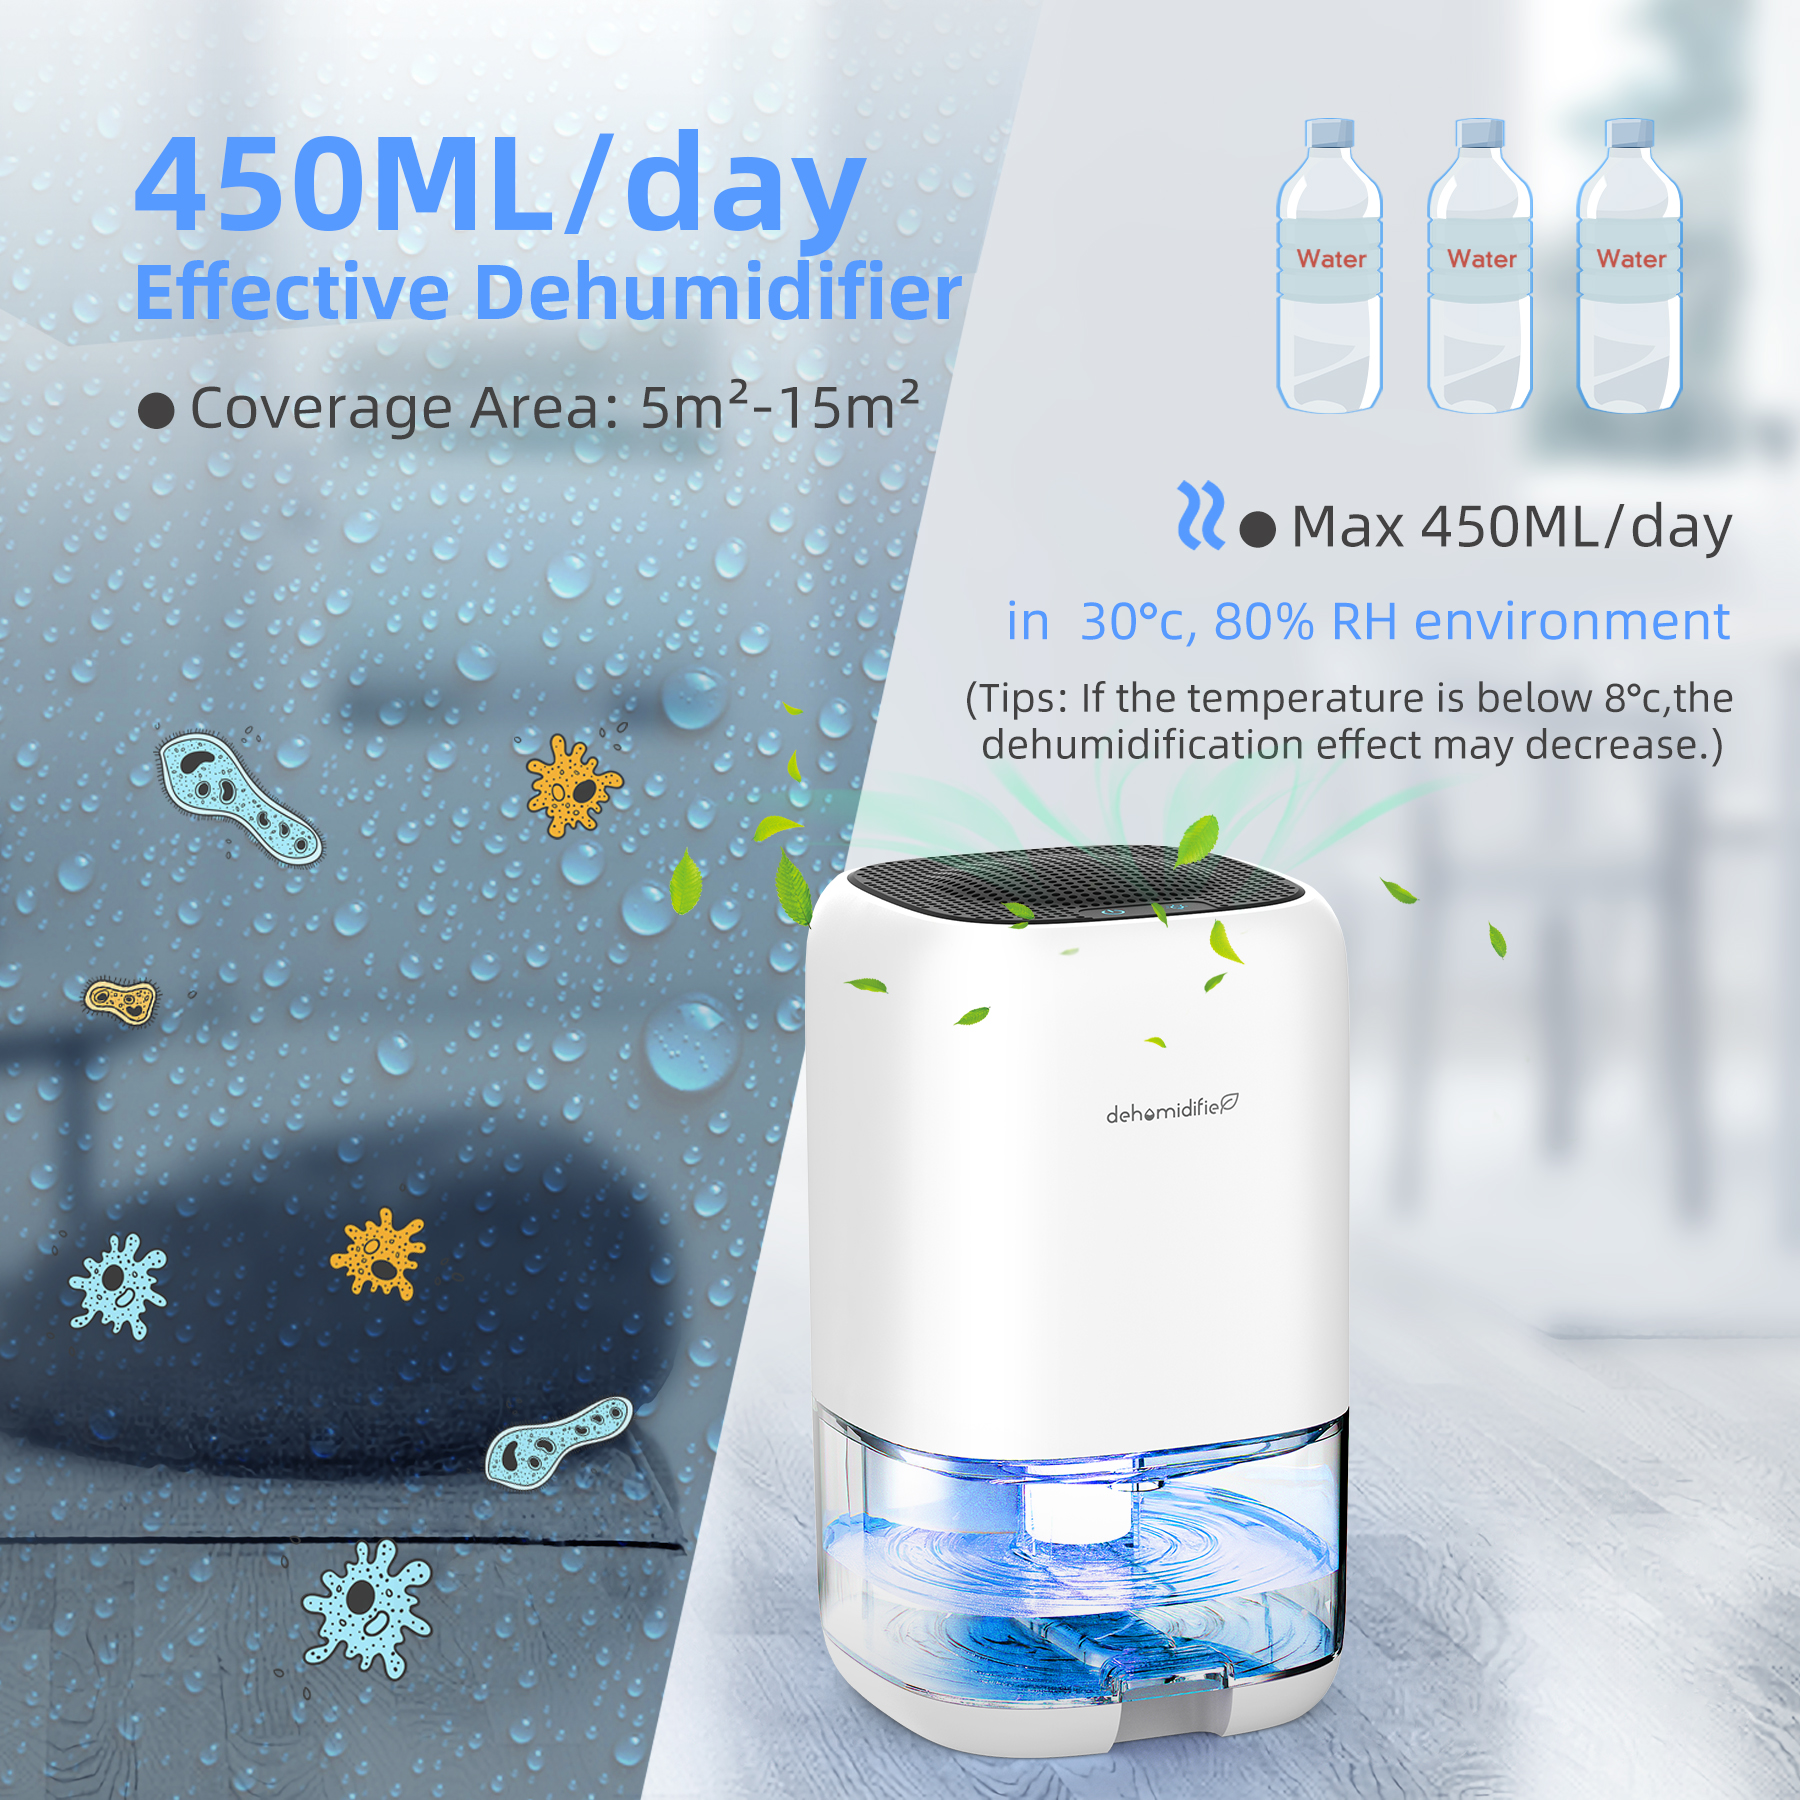 KLOUDIC Dehumidifier Portable and Ultra Quiet with Automatic Defrosting for Home 1000ML(2200 Cubic Feet) - image 3 of 8